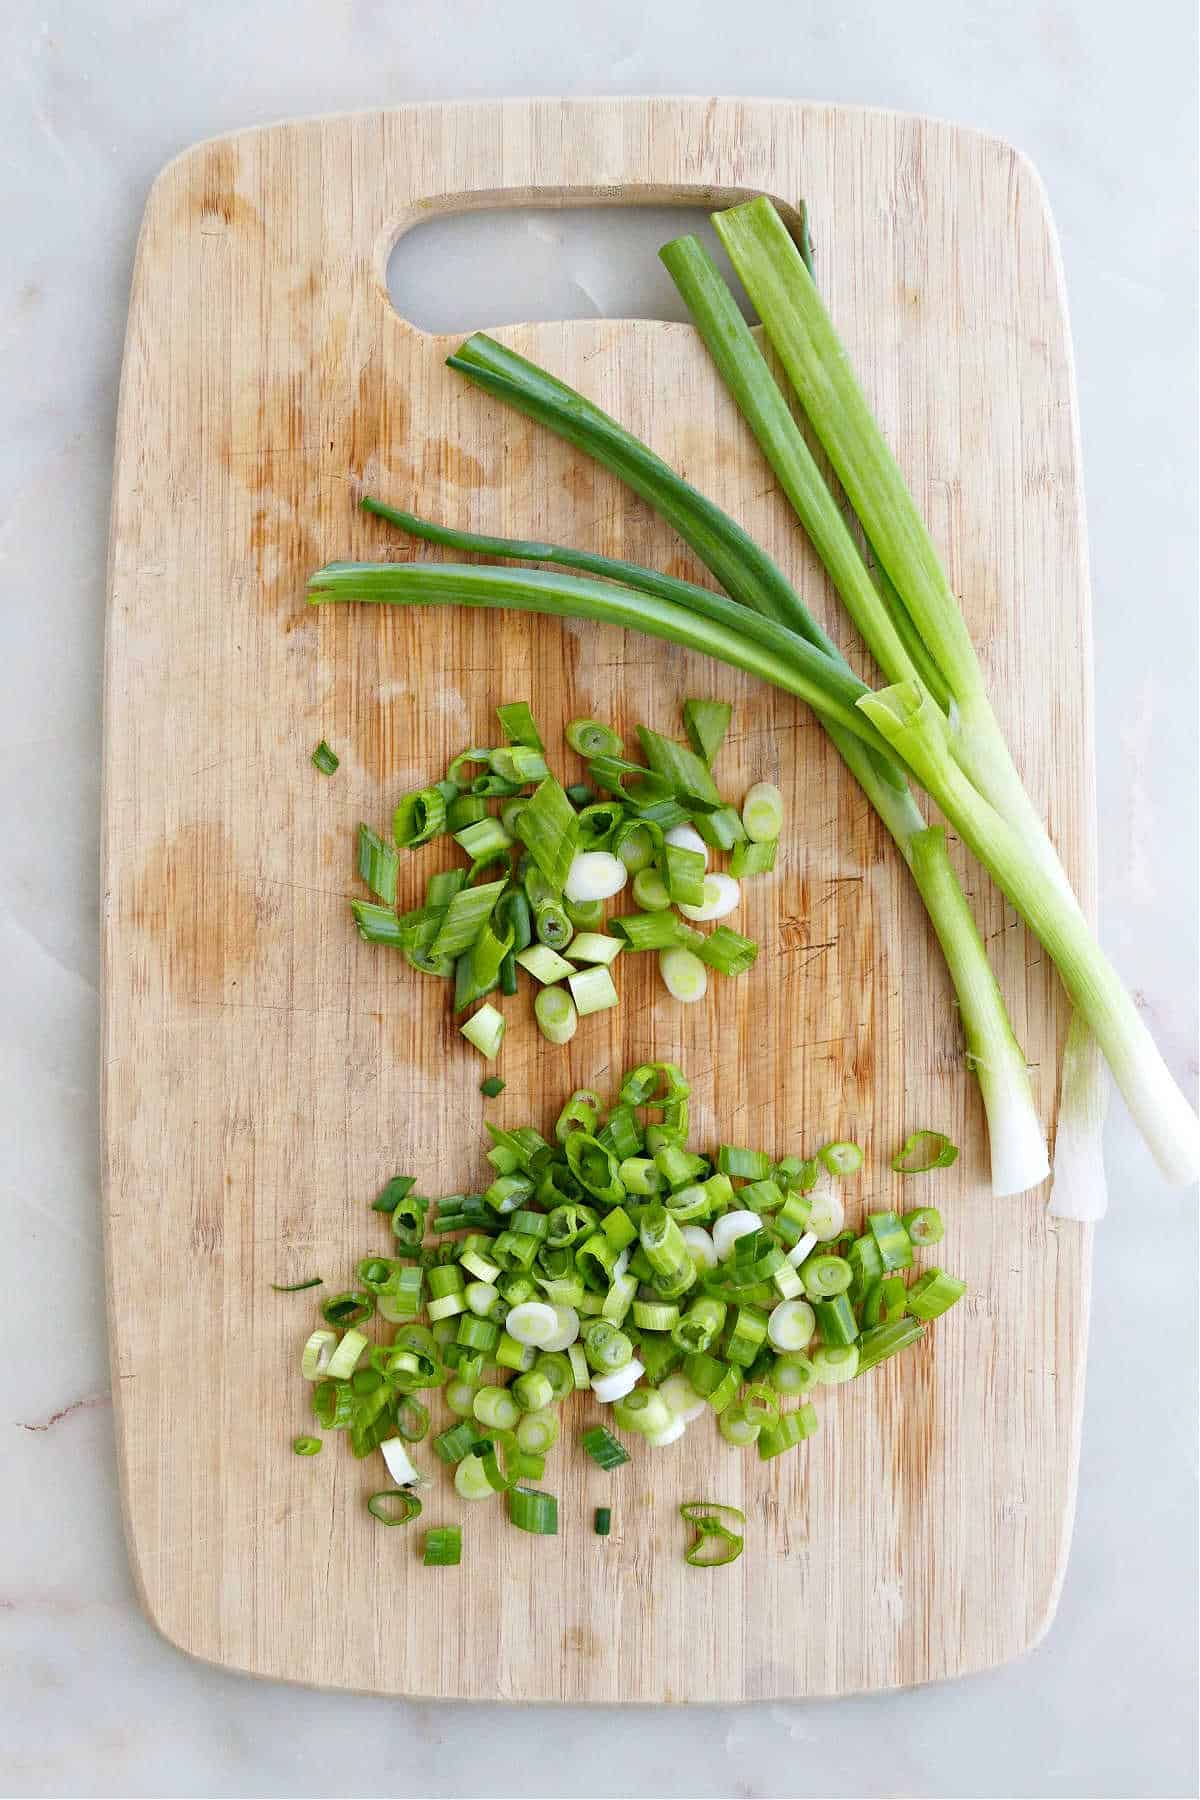 How to Cut Green Onions - IzzyCooking